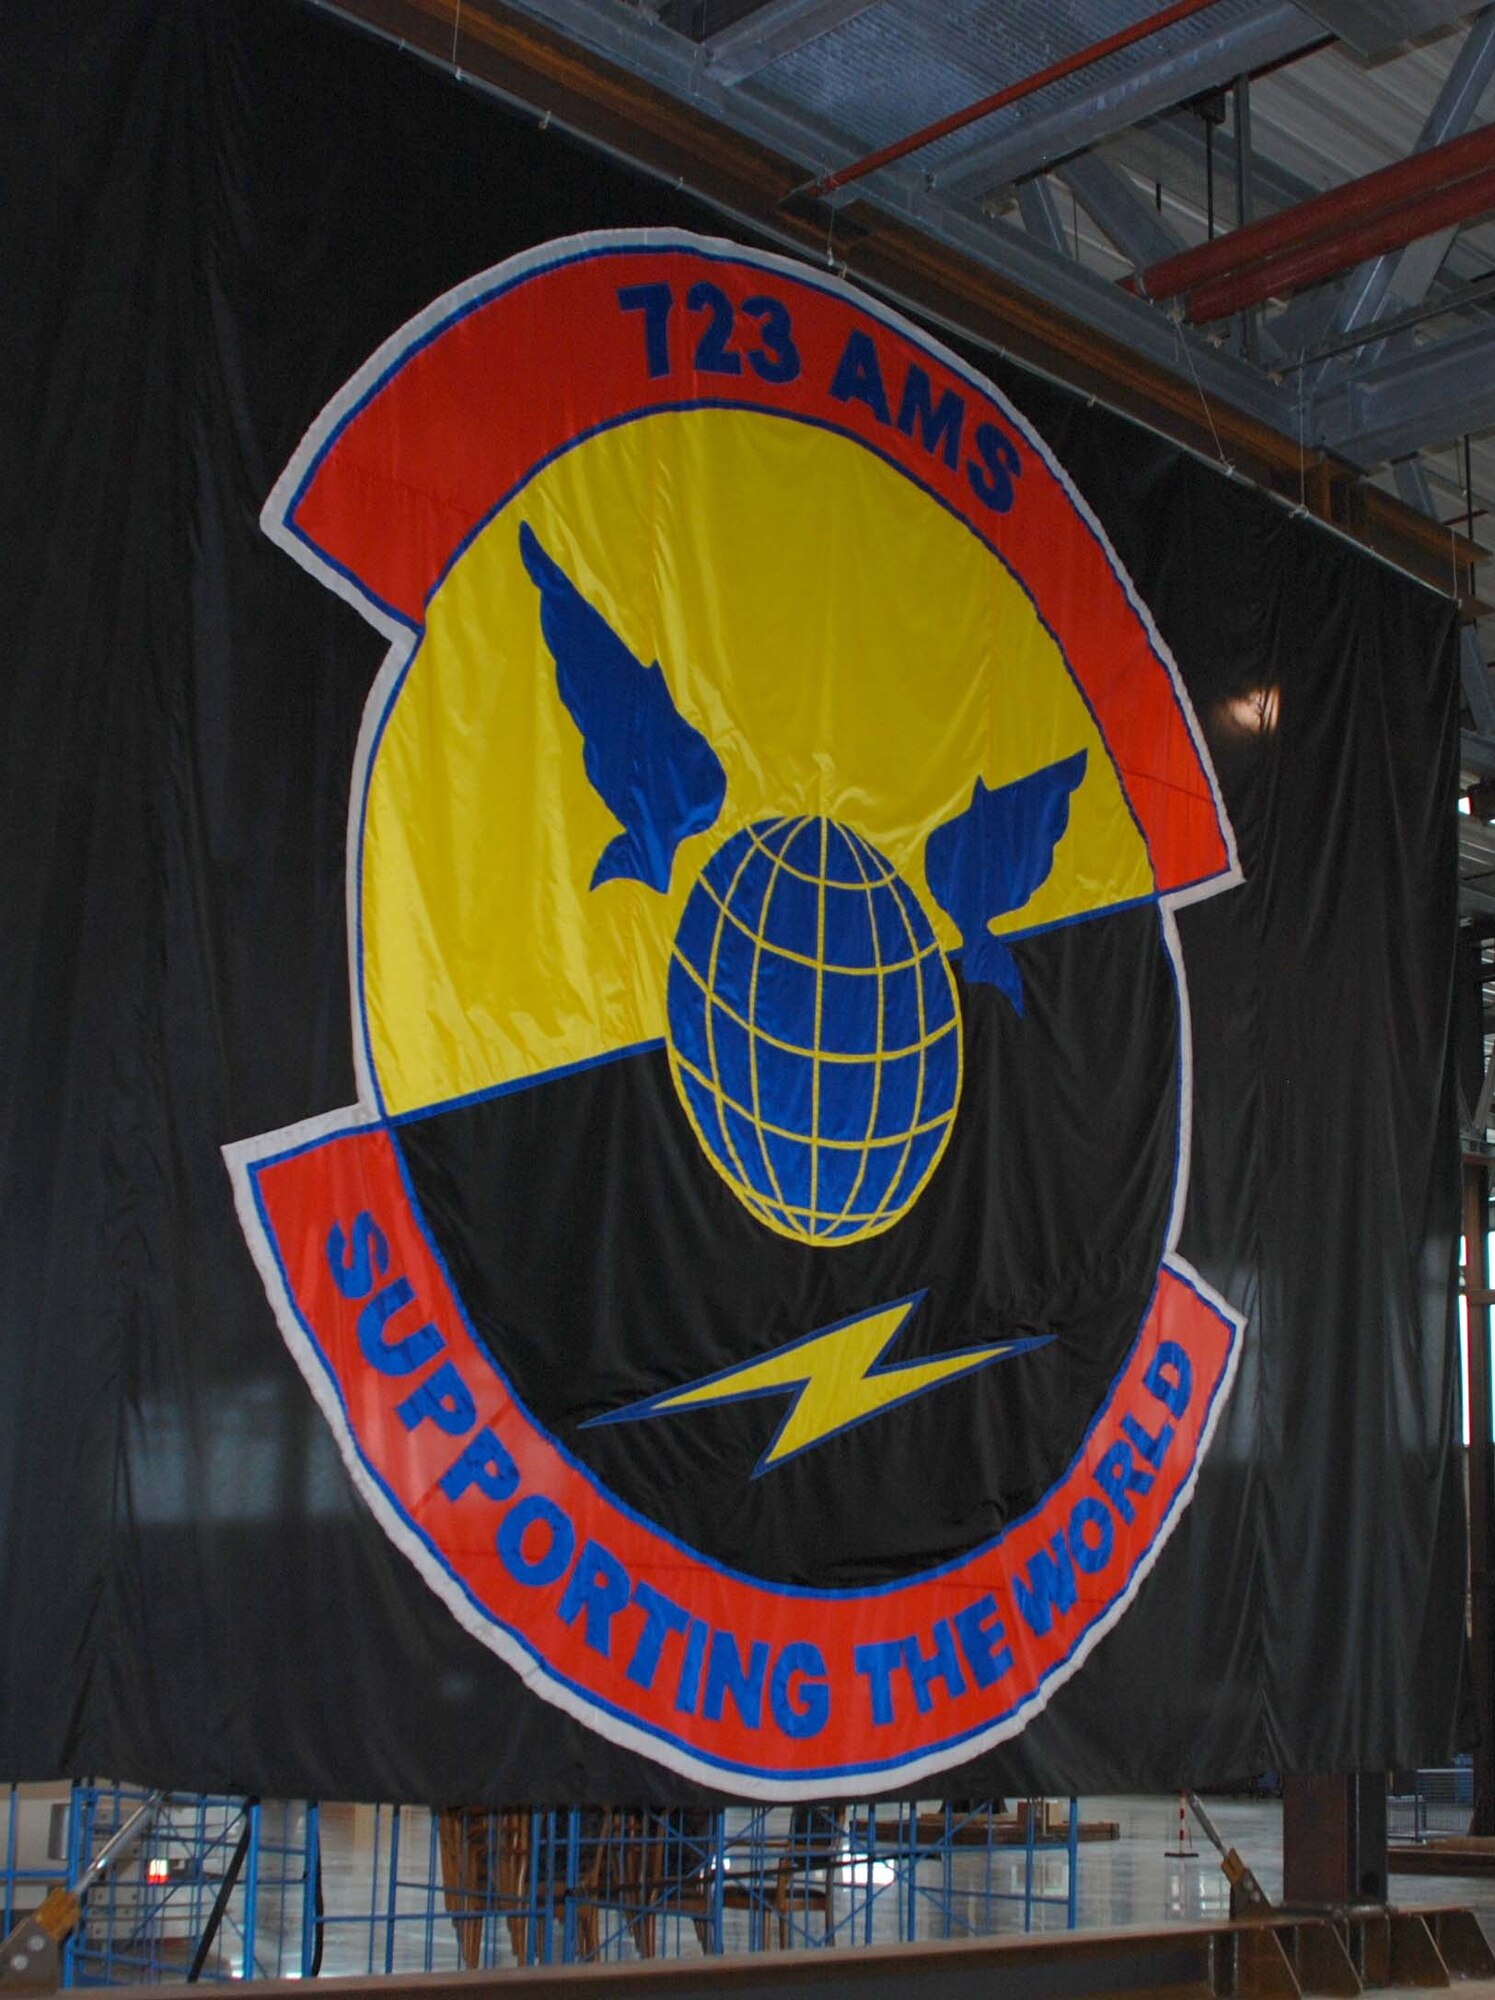 RAMSTEIN AIR BASE, Germany -- A banner for the 723rd Air Mobility Squadron hangs in a mobility warehouse here May 27. Members of the 459th Air Refueling Wing members spent their annual tour here in support of airport operations at U.S. Air Forces in Europe headquarters. (U.S. Air Force photo/Tech. Sgt. Amaani Lyle)